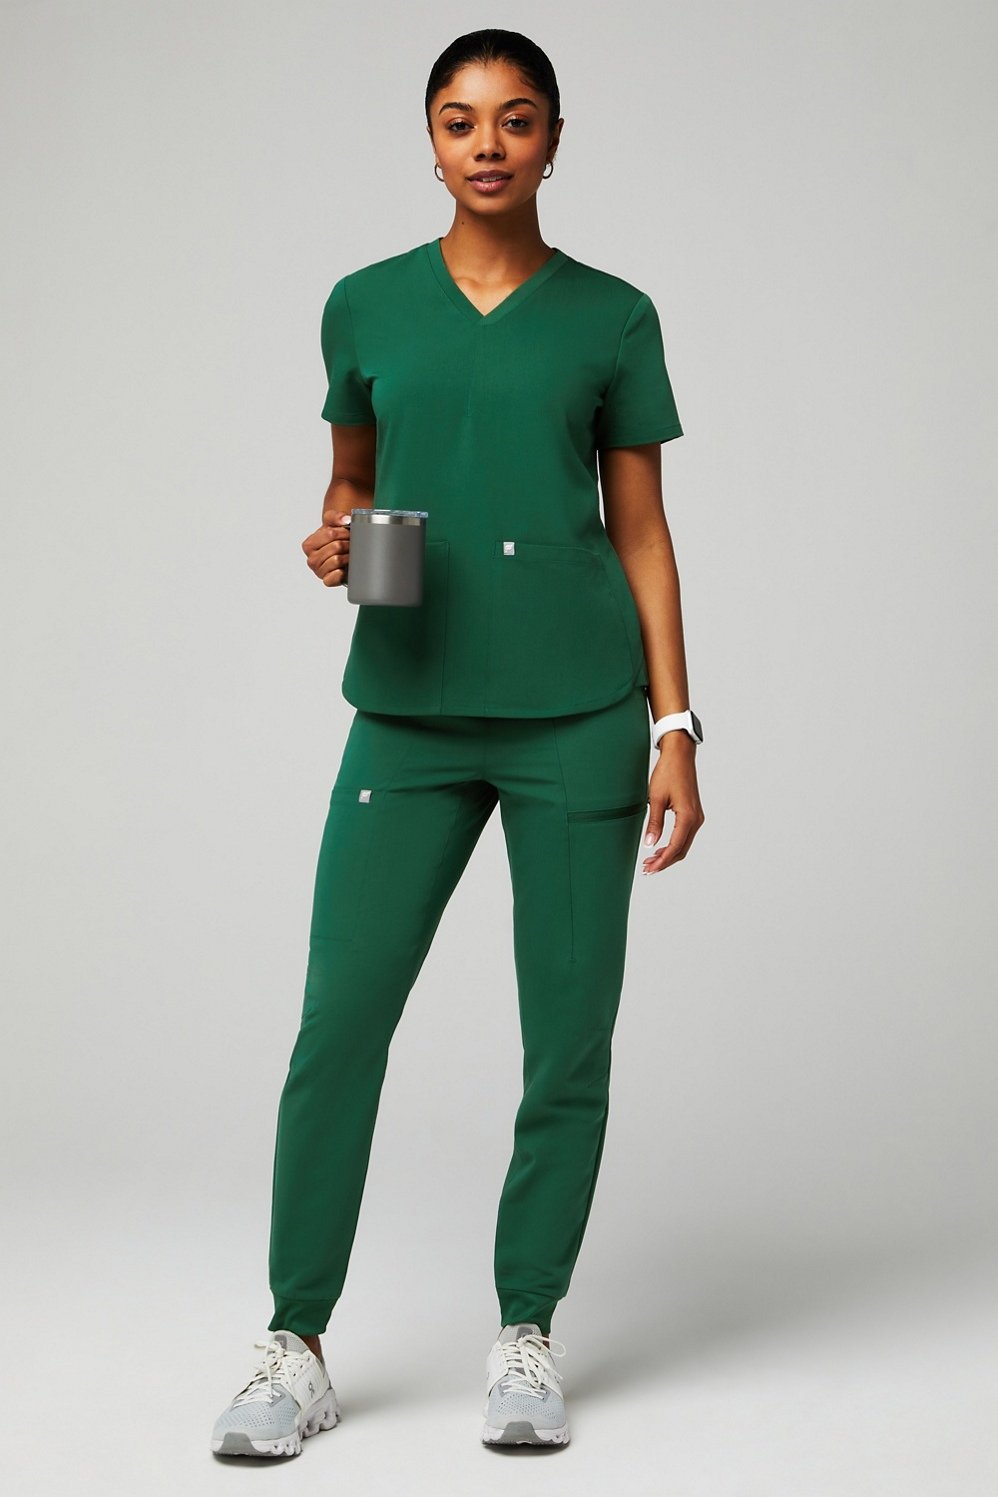 What's the step for participating in Fabletics Scrubs Giveaway?, by  Azrukhan